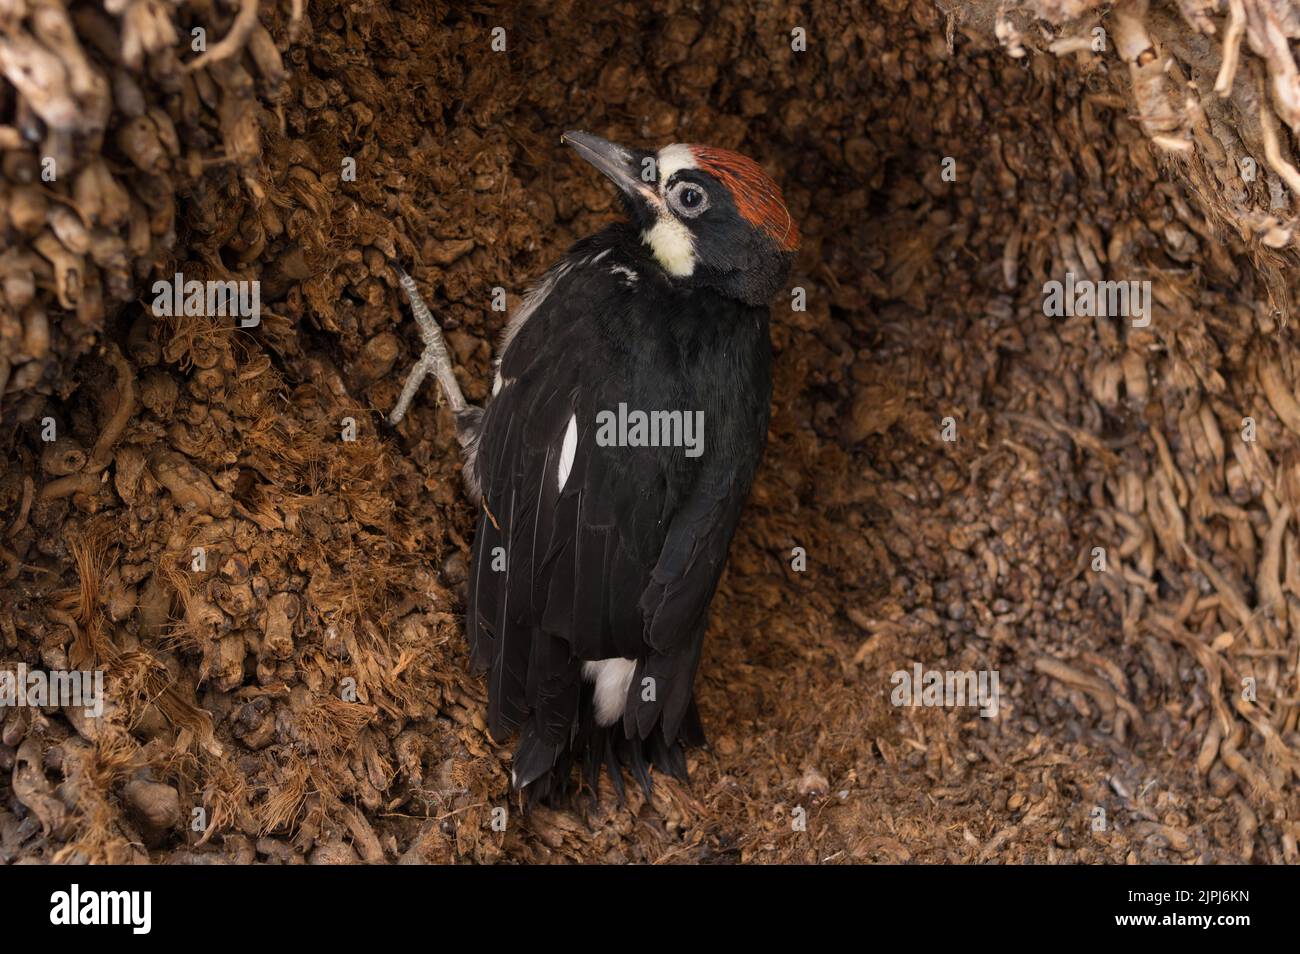 Acorn Woodpecker,Melanerpes formicivorus, shown in Pasadena, California clinging to a recessed area of a palm tree trunk after falling from nest. Stock Photo